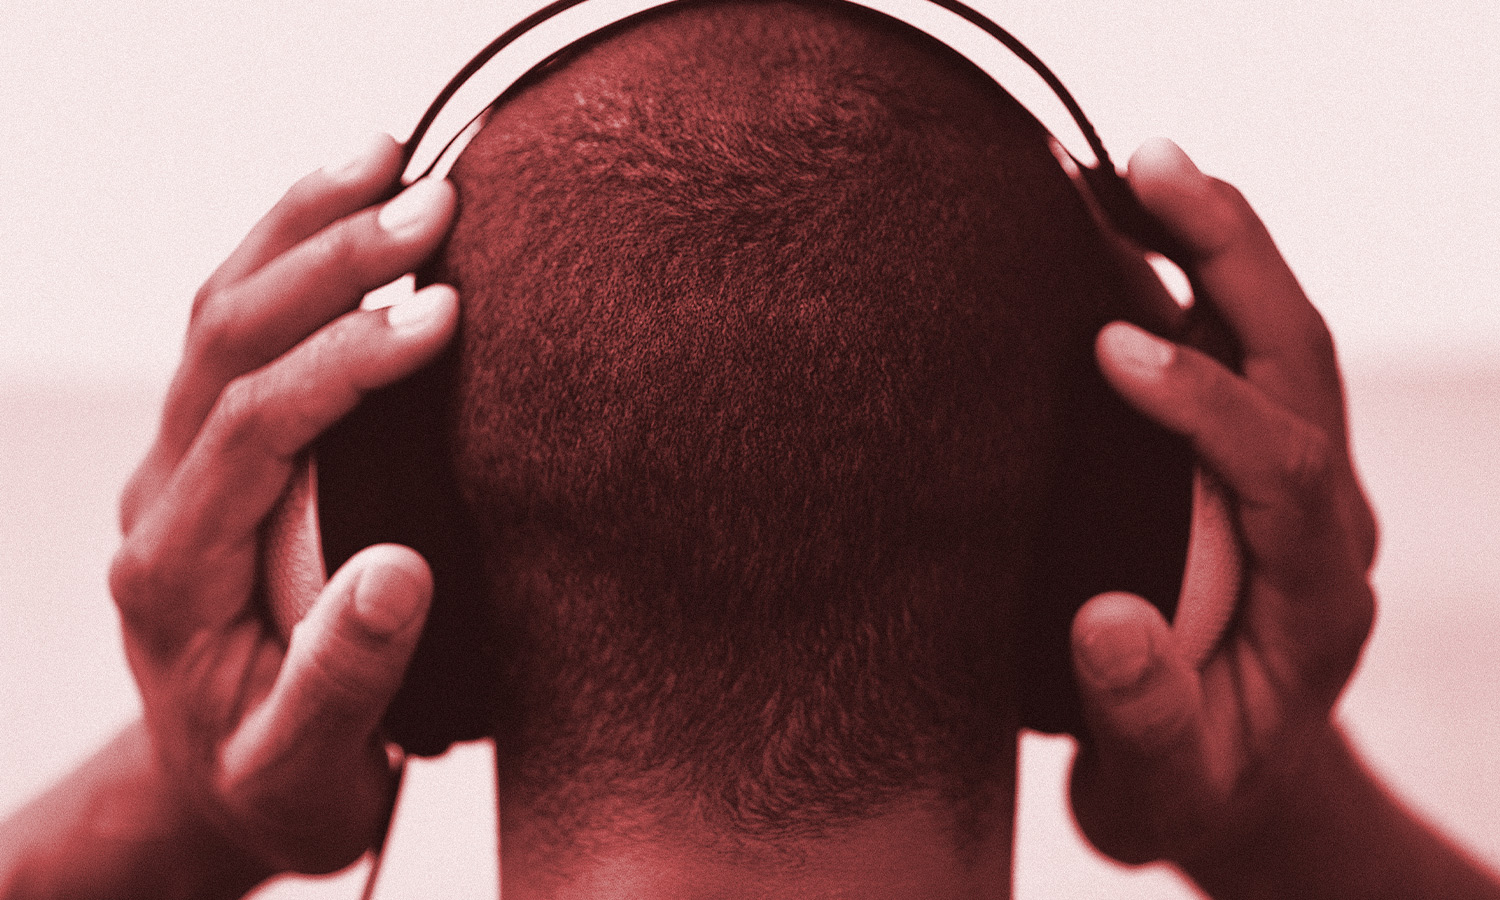 Image shows the back of a man's head wearing headphones as he listens to music to illustrate songs getting stuck in people's heads or the phenomenon known as earworms.